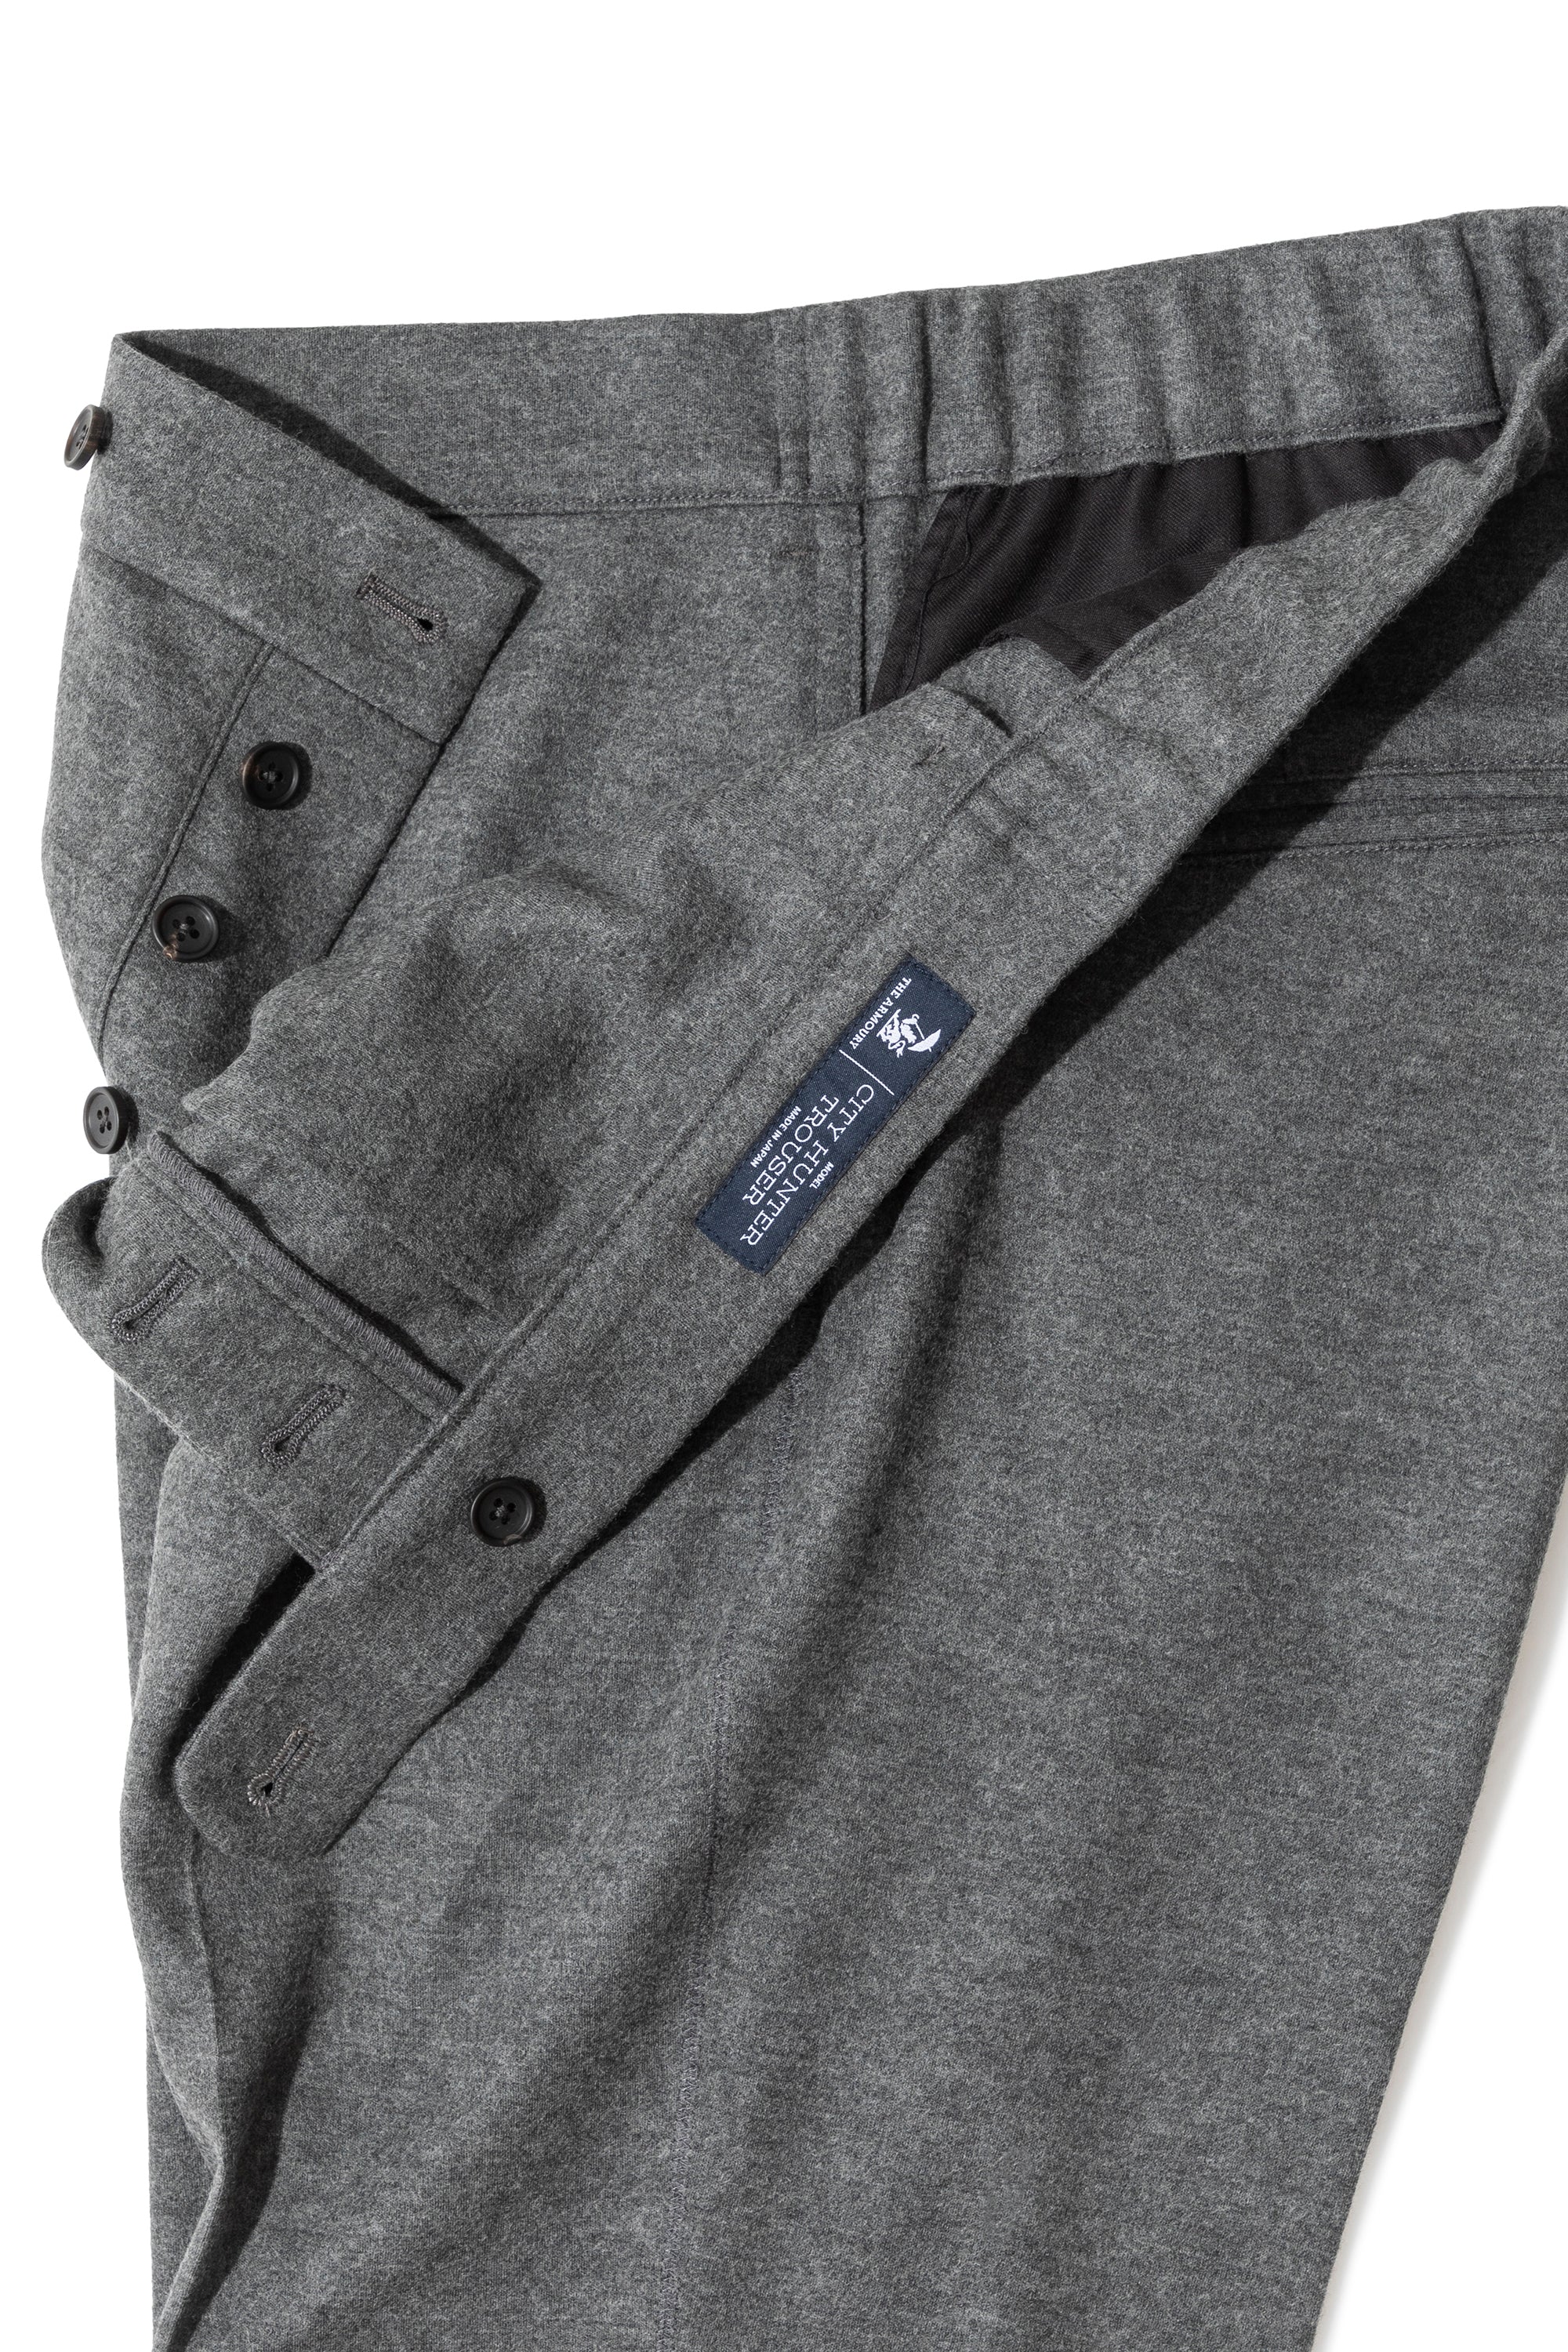 The Armoury Grey Wool City Hunter Trousers